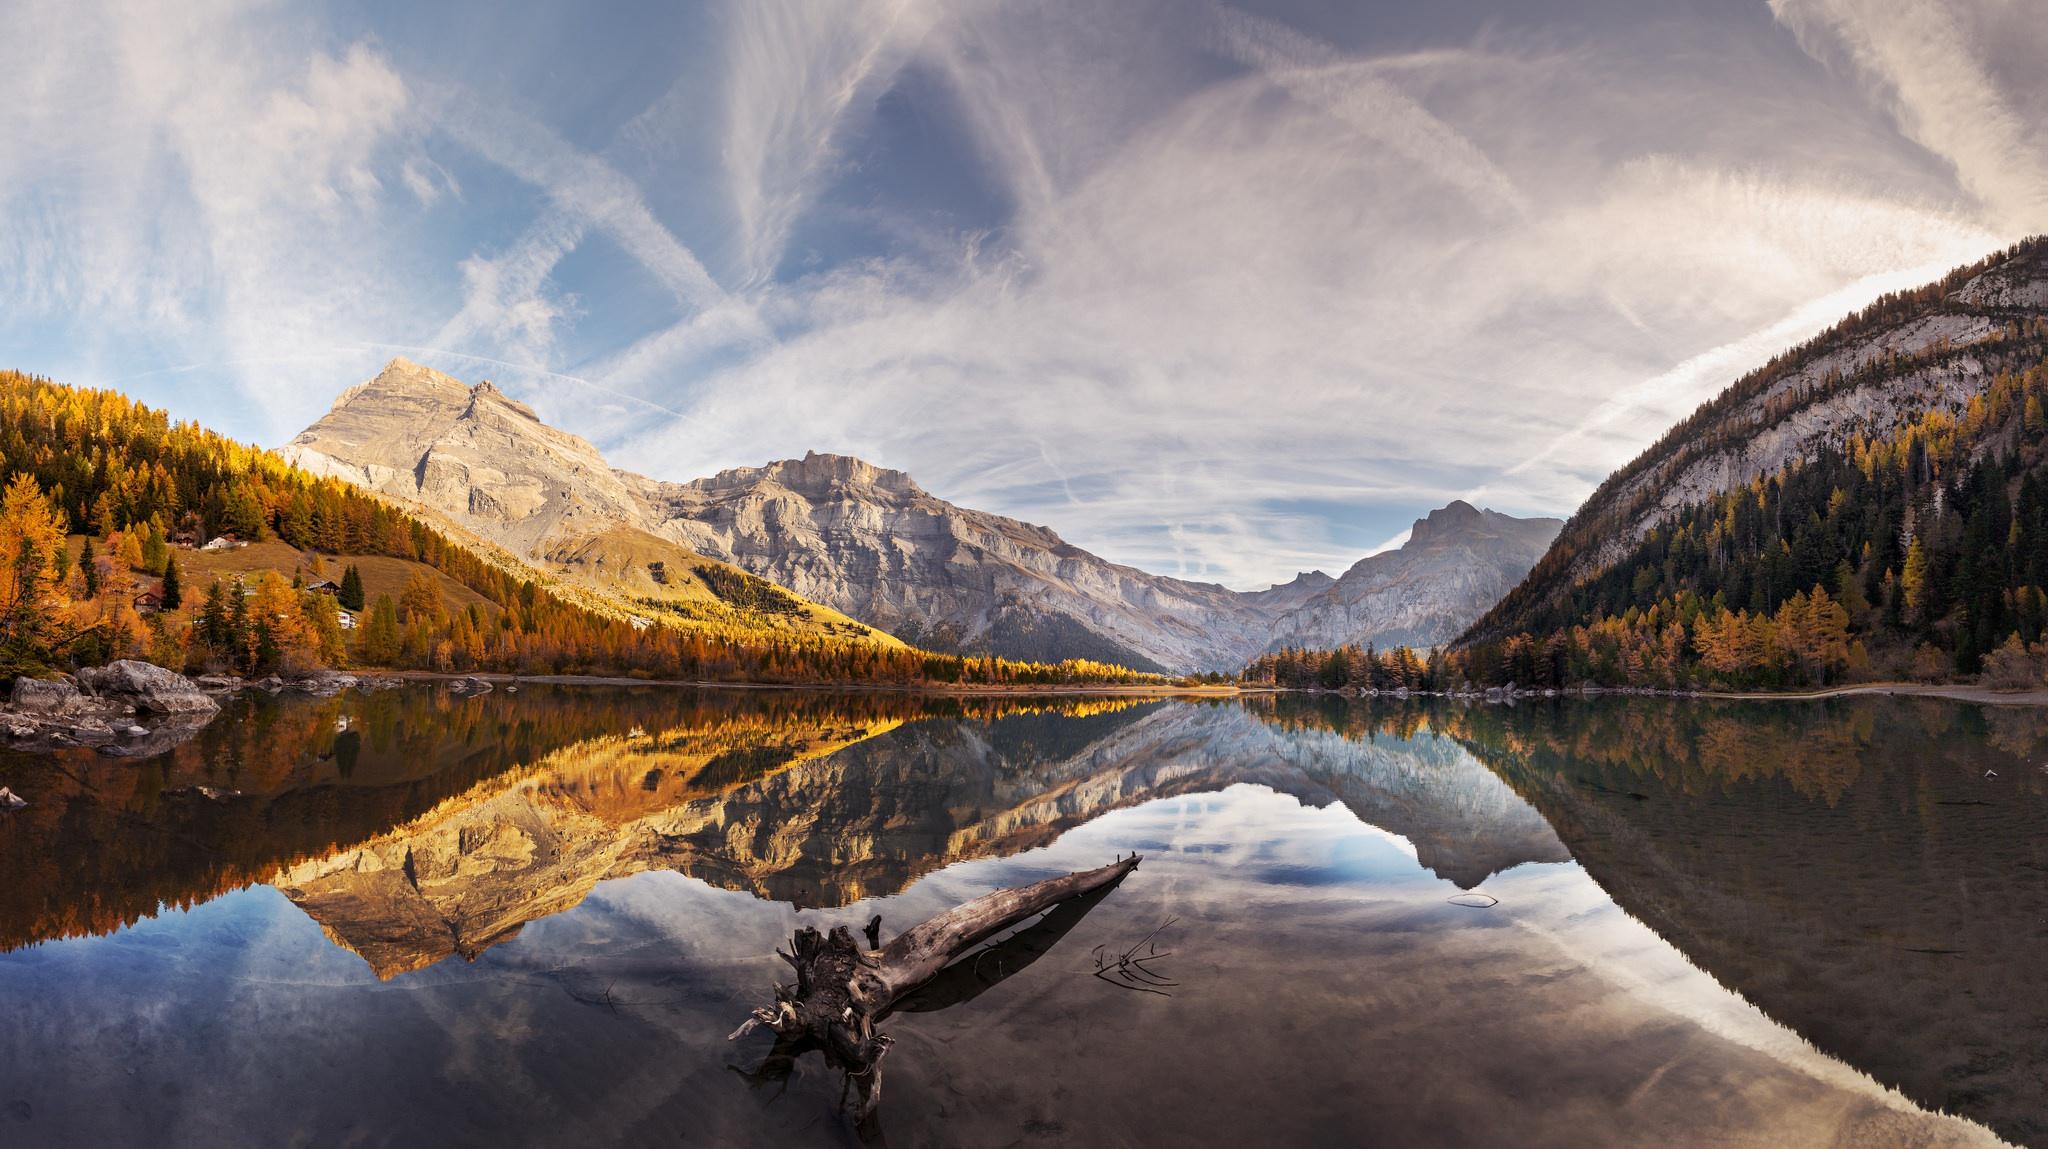 #mountains, #trees, #nature, #clouds, #reflection, #mountain